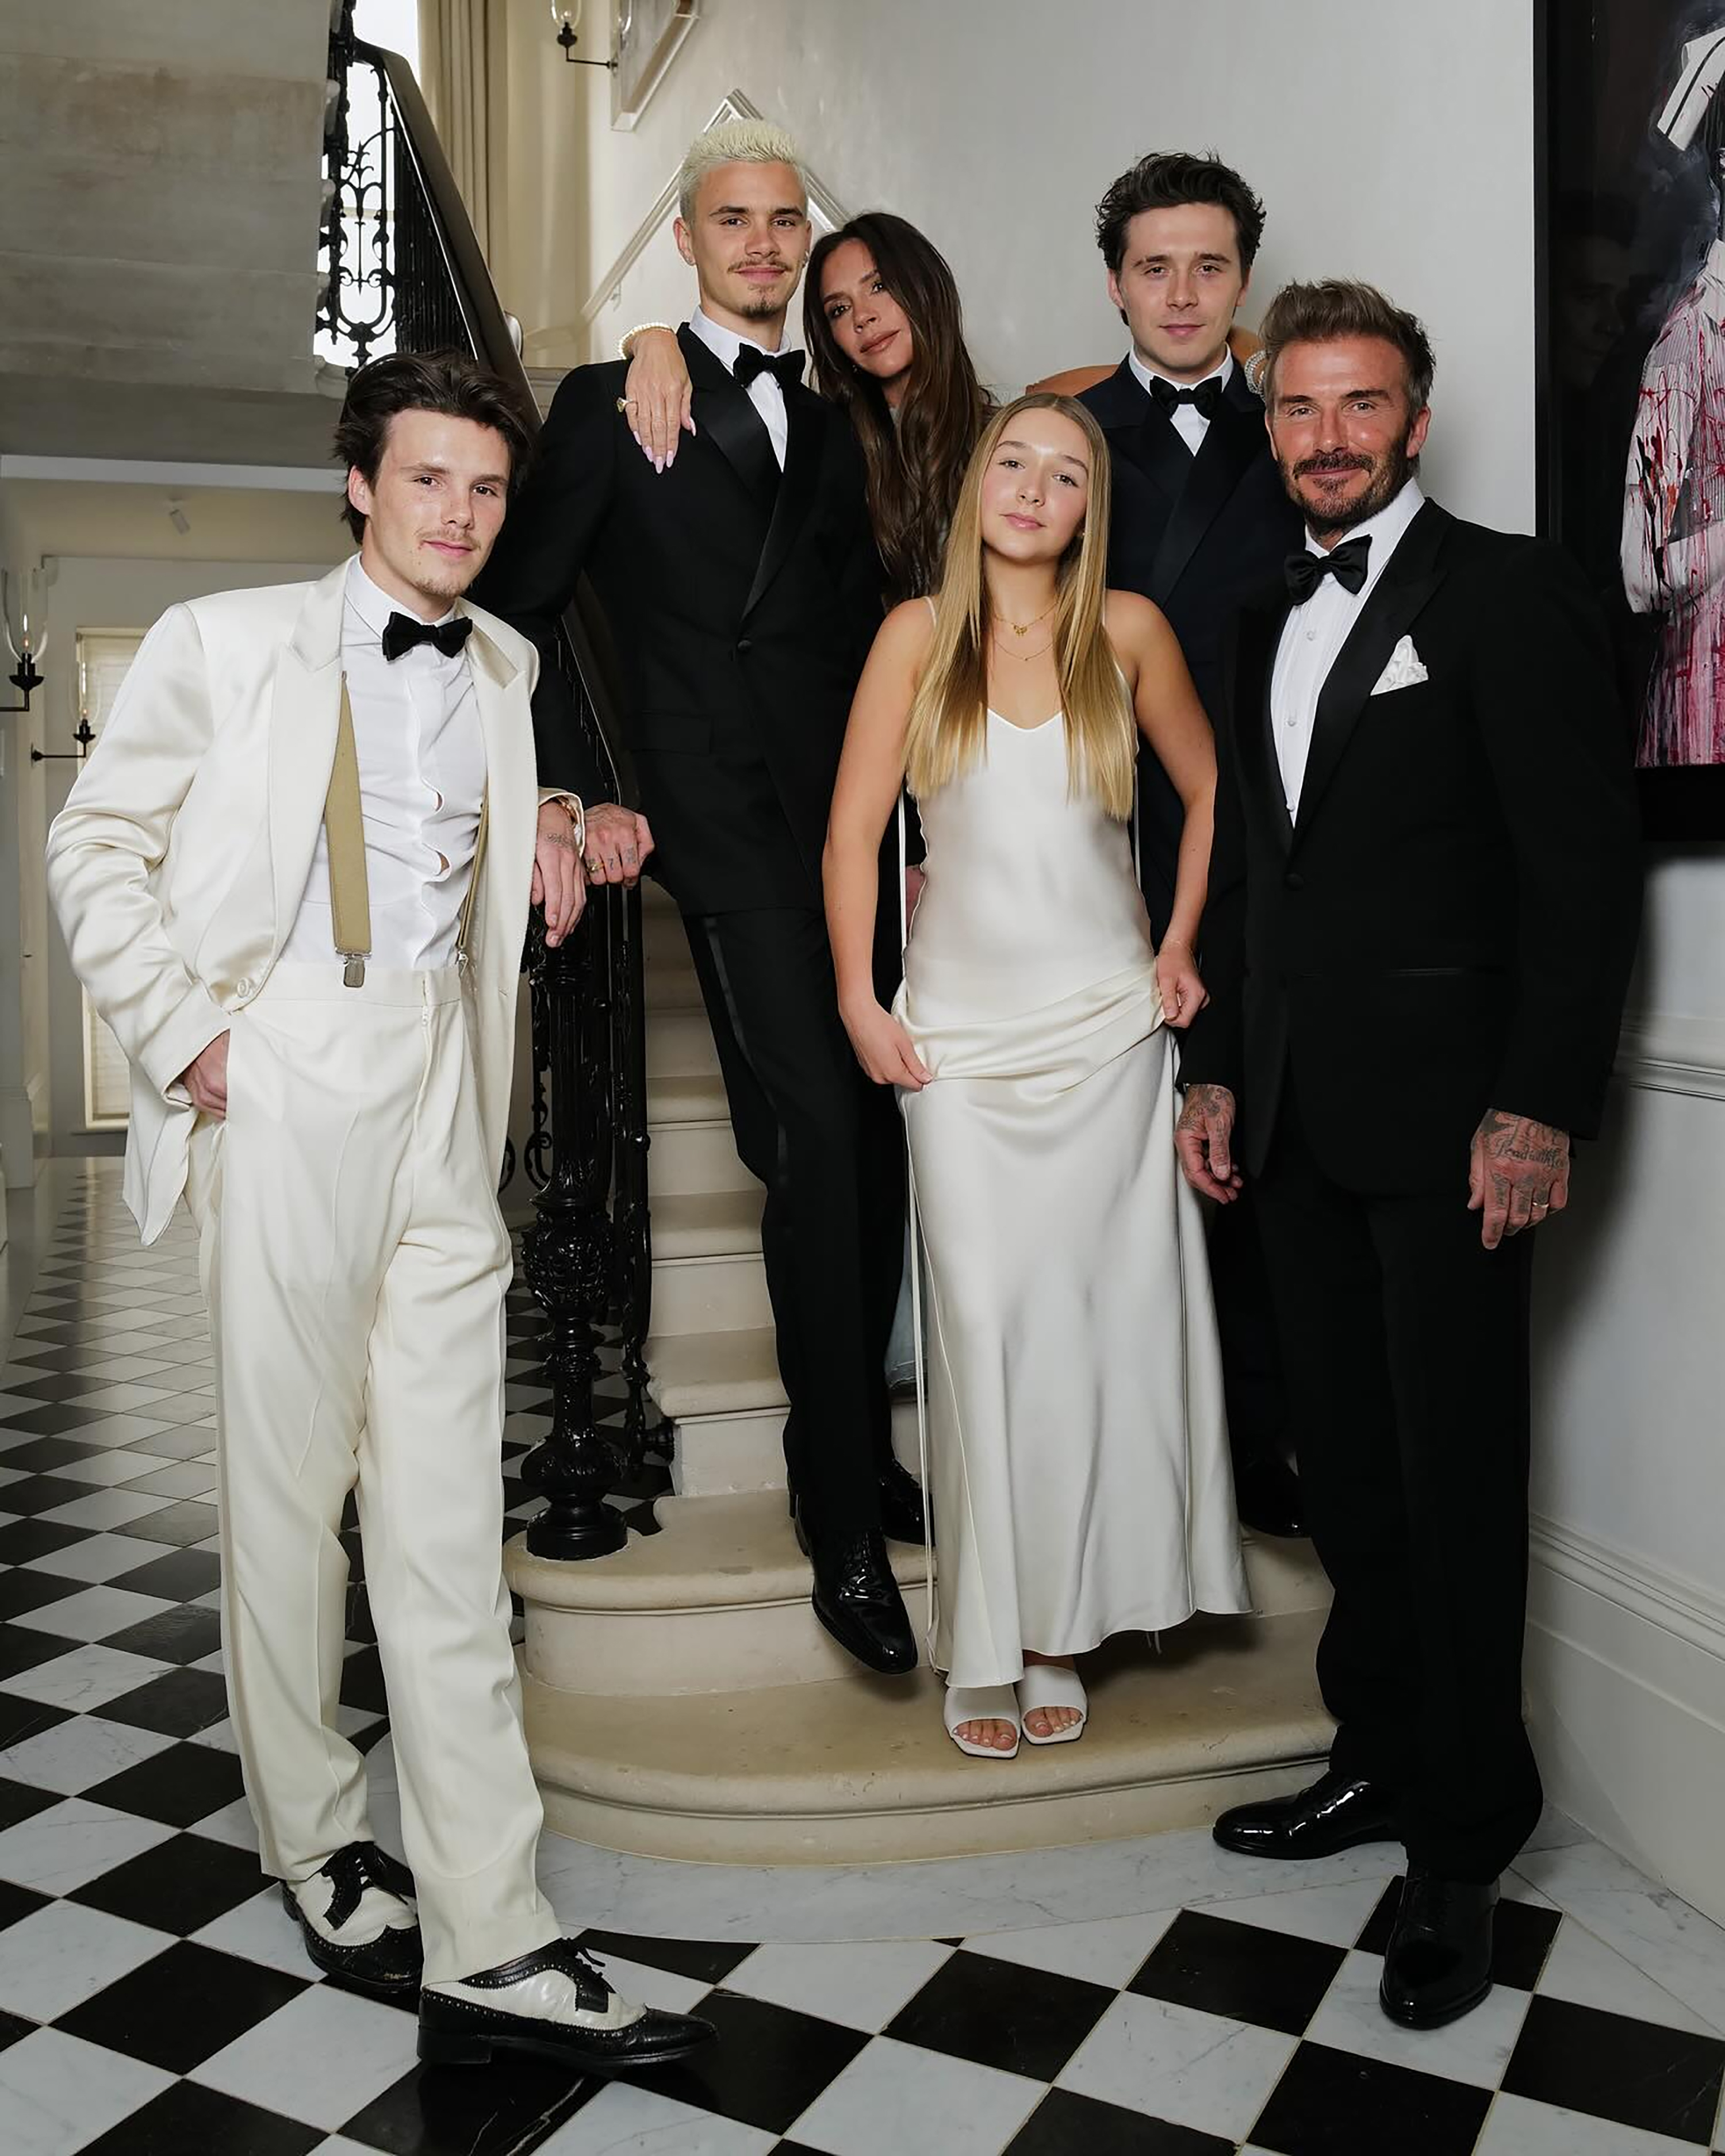 The Beckhams were all smiles as they stood together for photographers at the exclusive Oswald’s venue last night